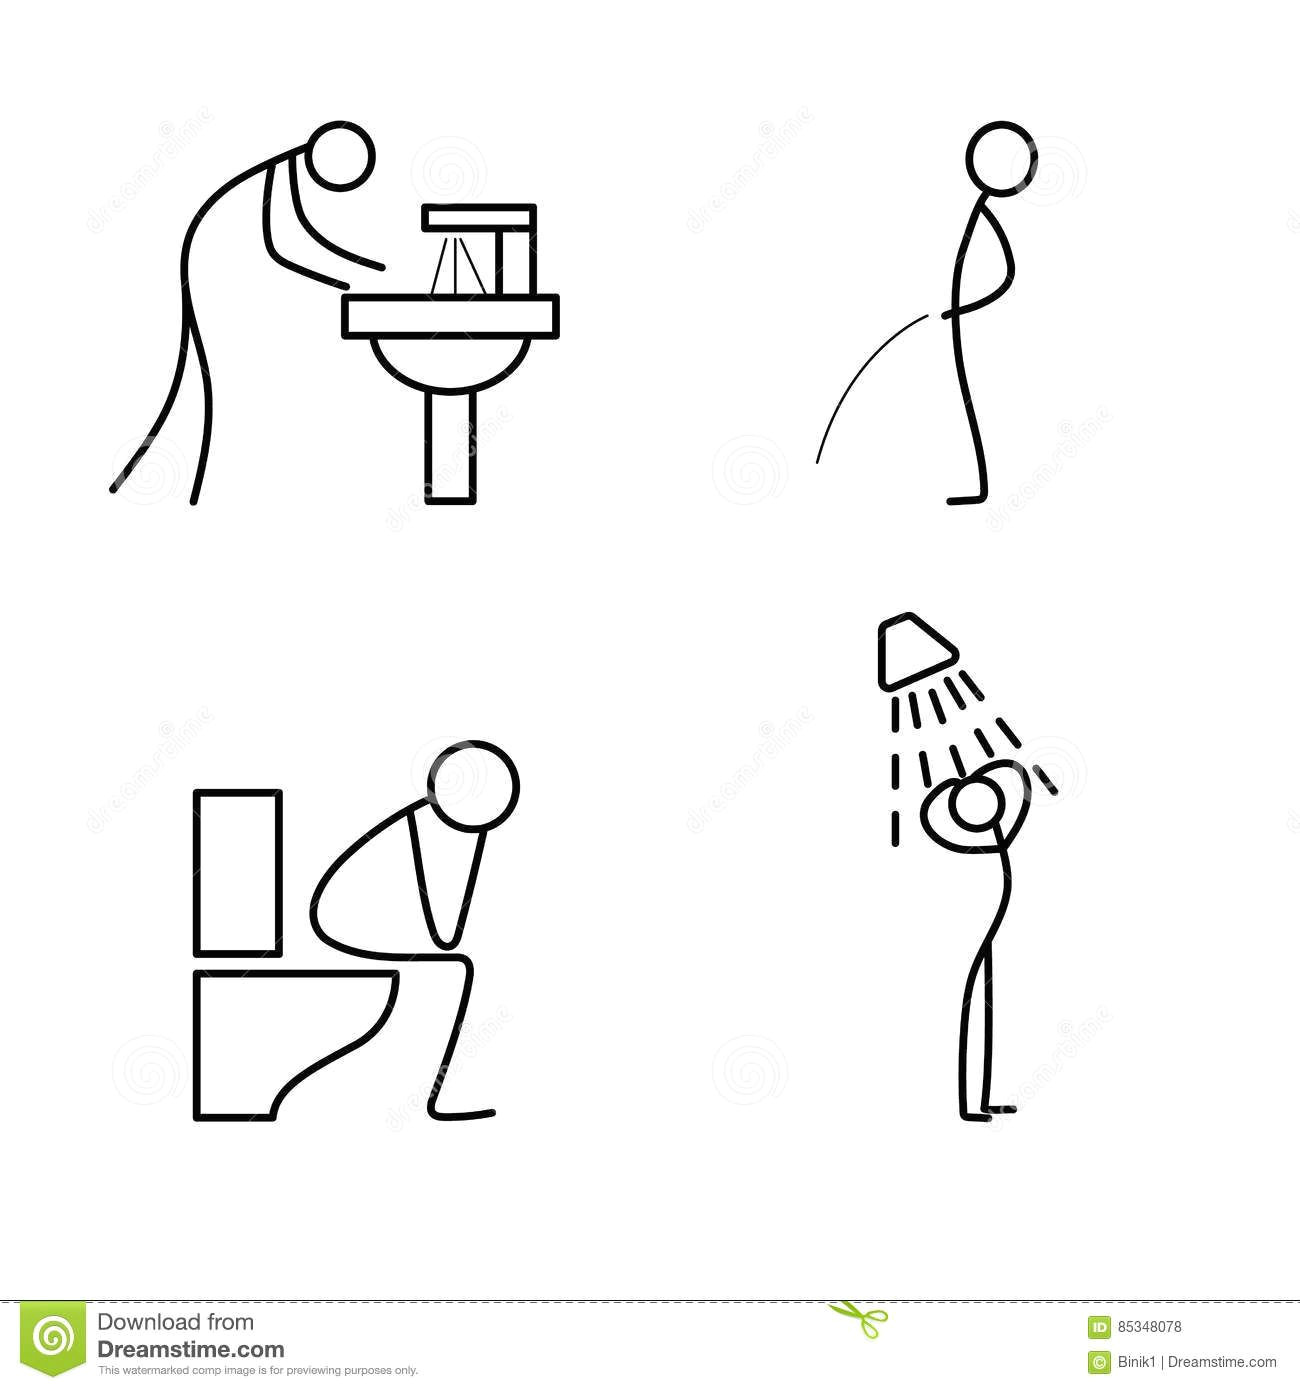 Drawing Of Person with Hands Up Cartoon Icon Of Sketch Stick Figure Doing Life Routine Download